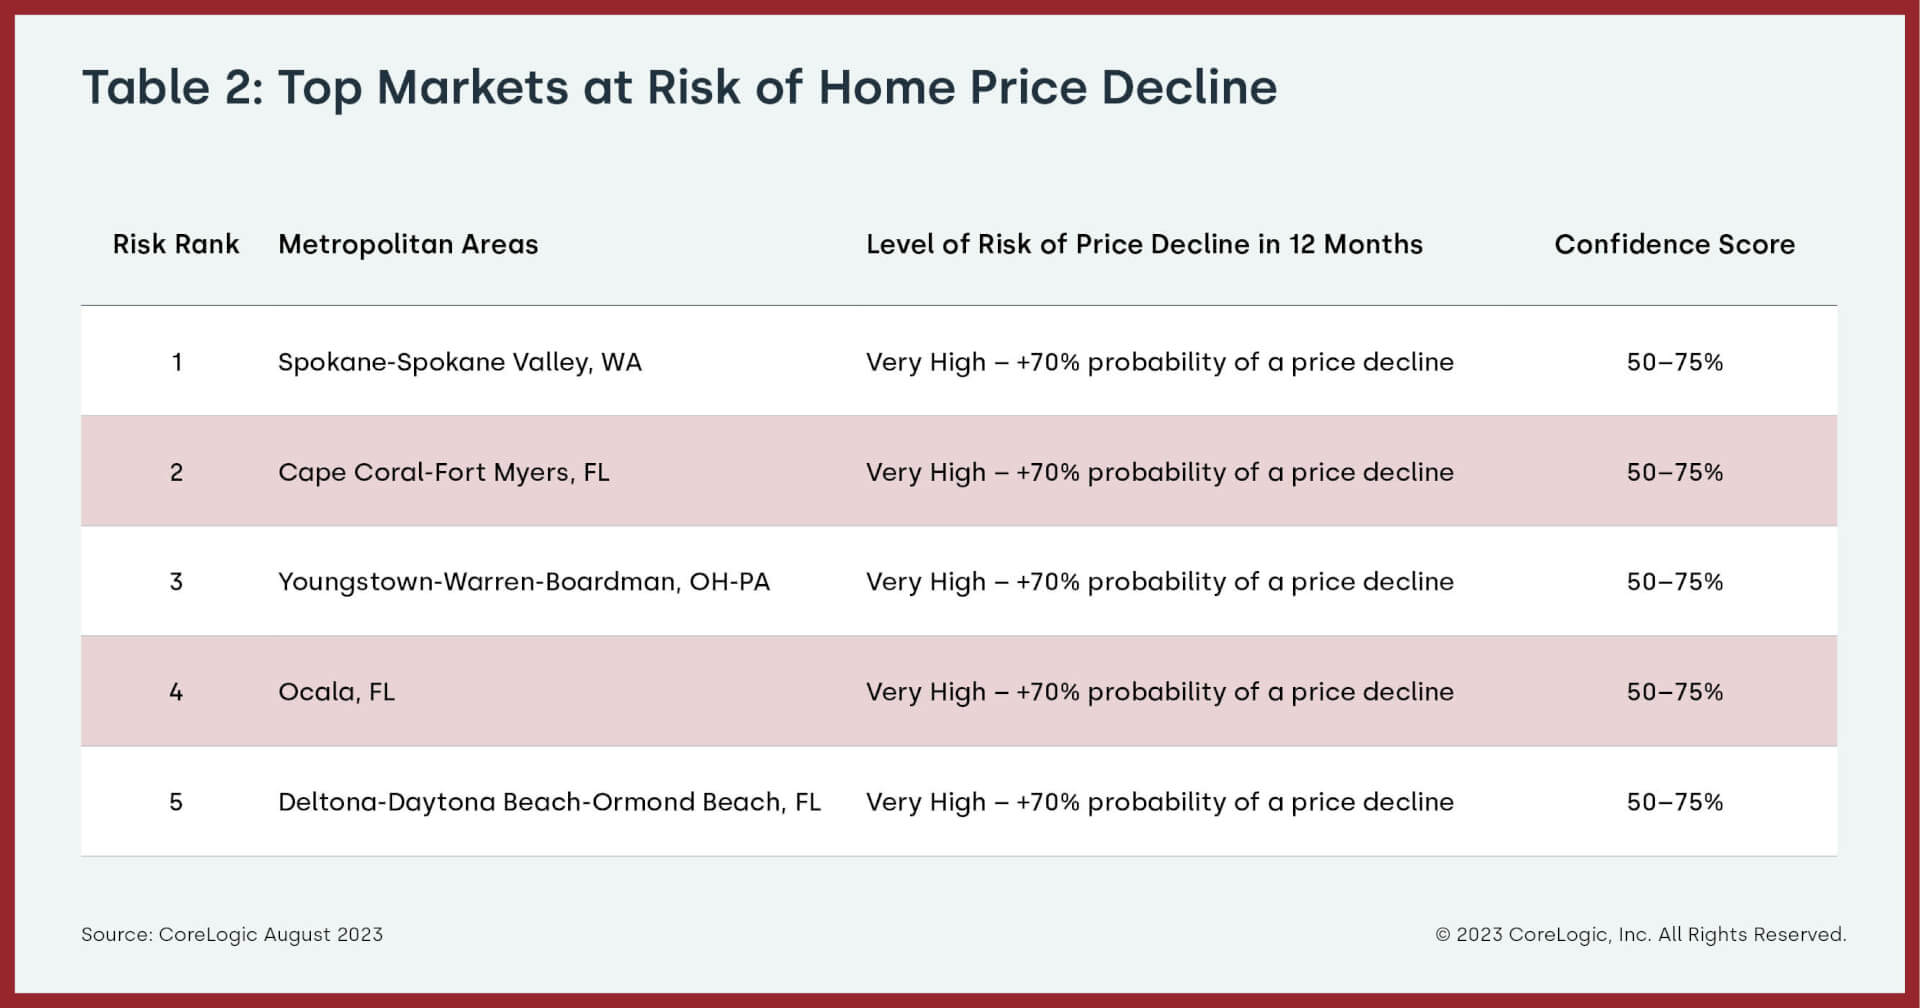 Top five U.S. markets at risk of home price declines over the next 12 months